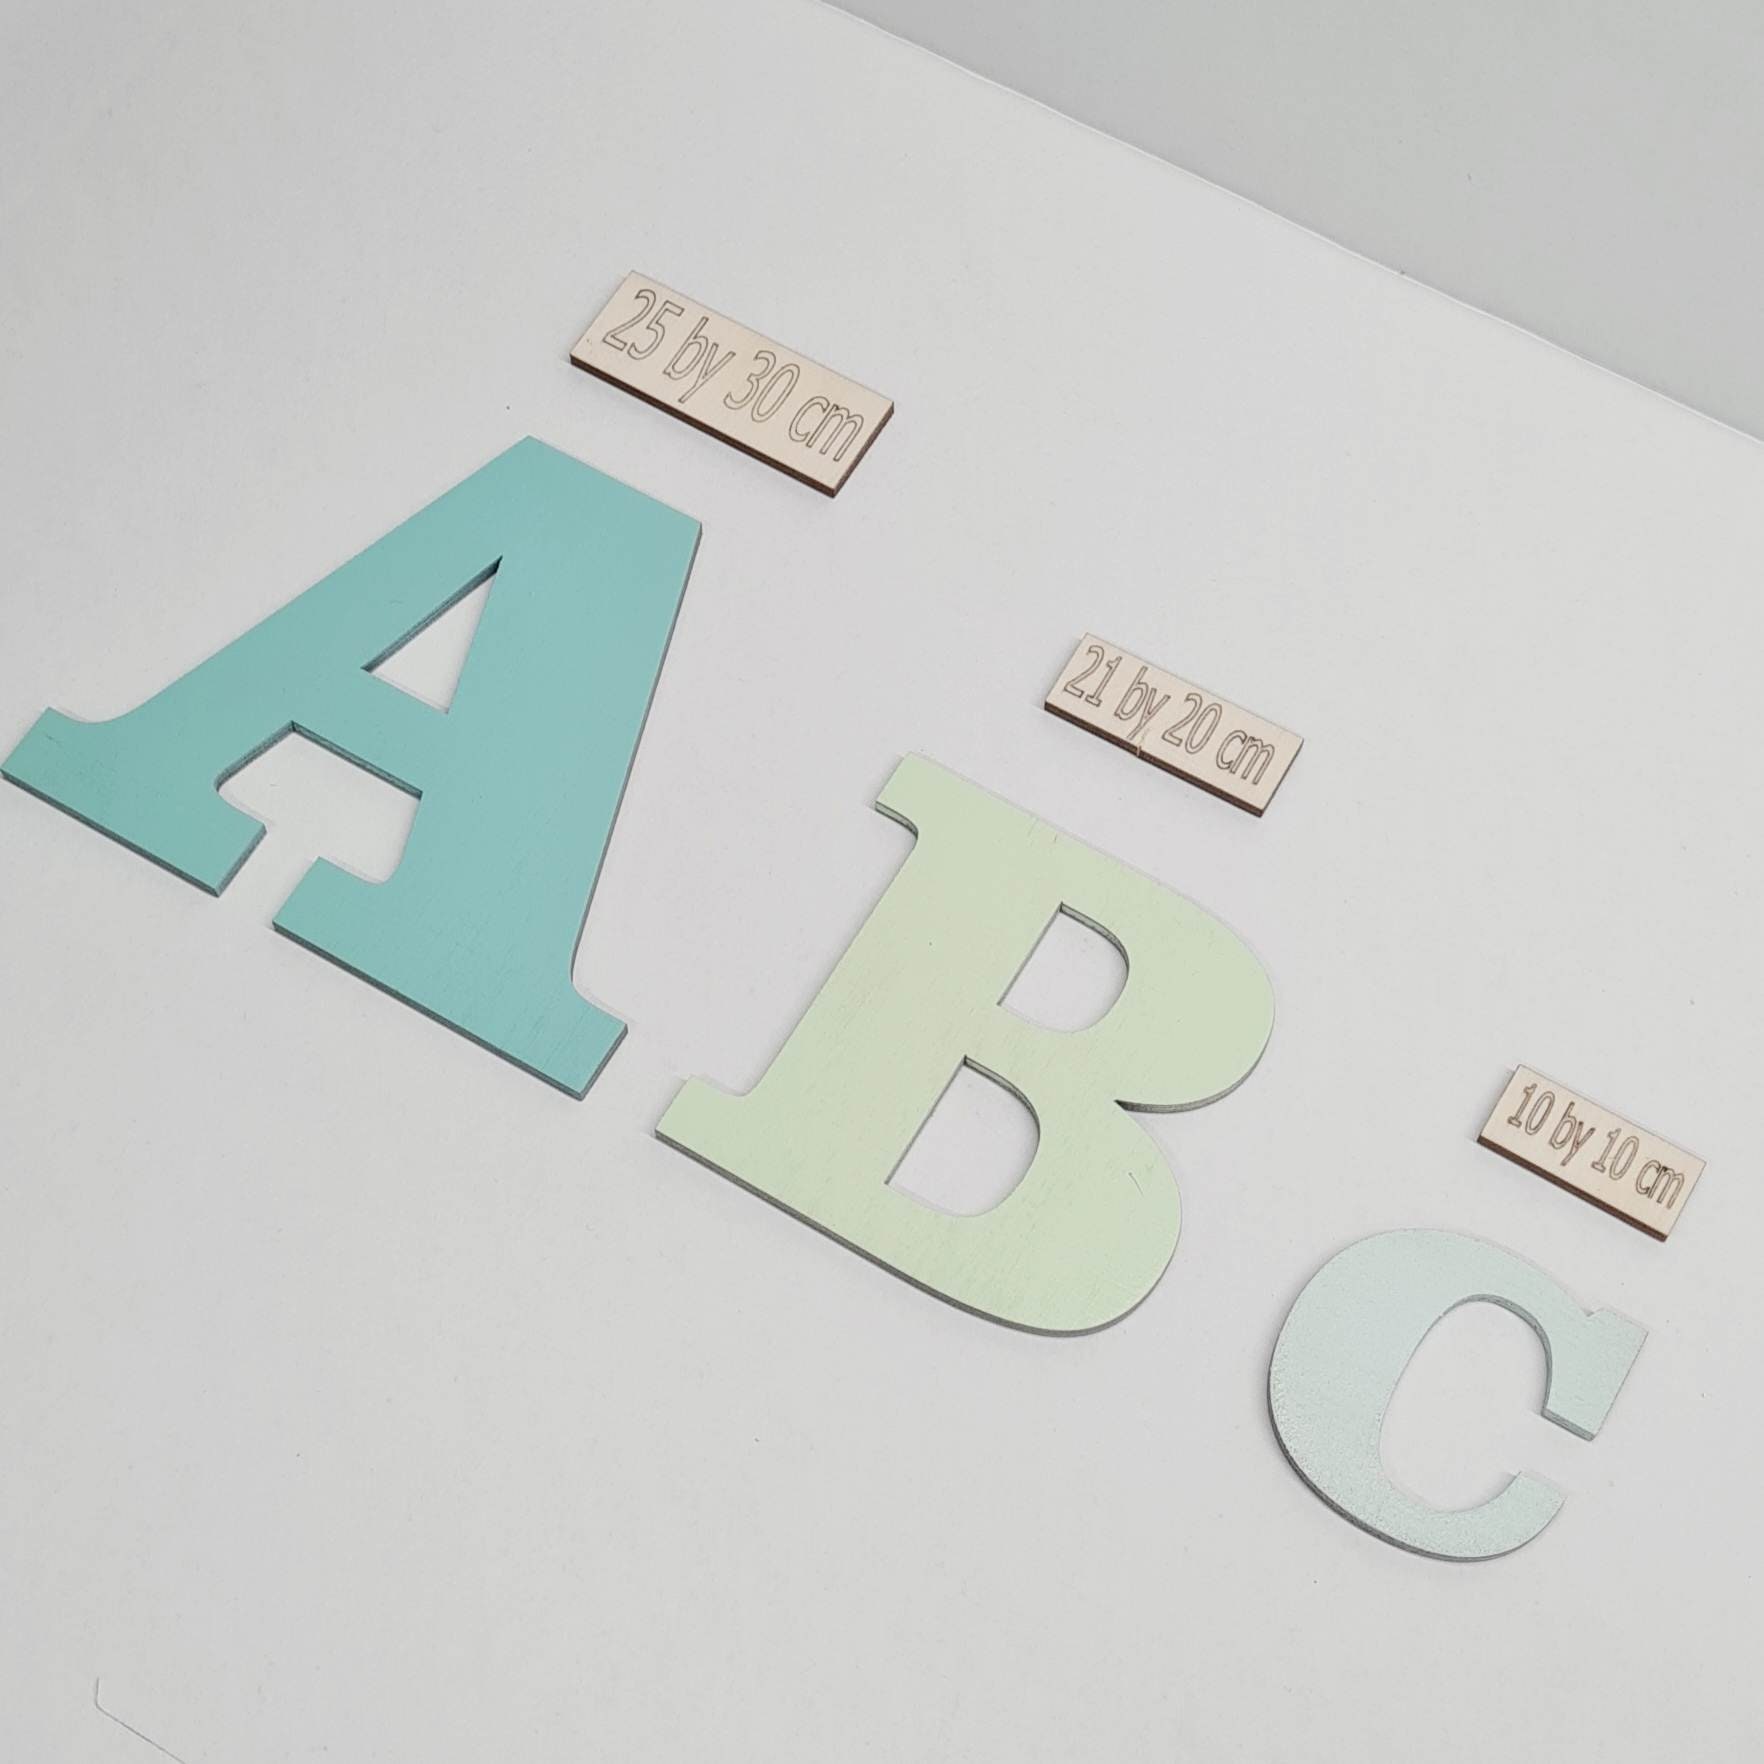 Muted Pastel A-Z Bulletin Board Letters, Punctuation, and Numbers